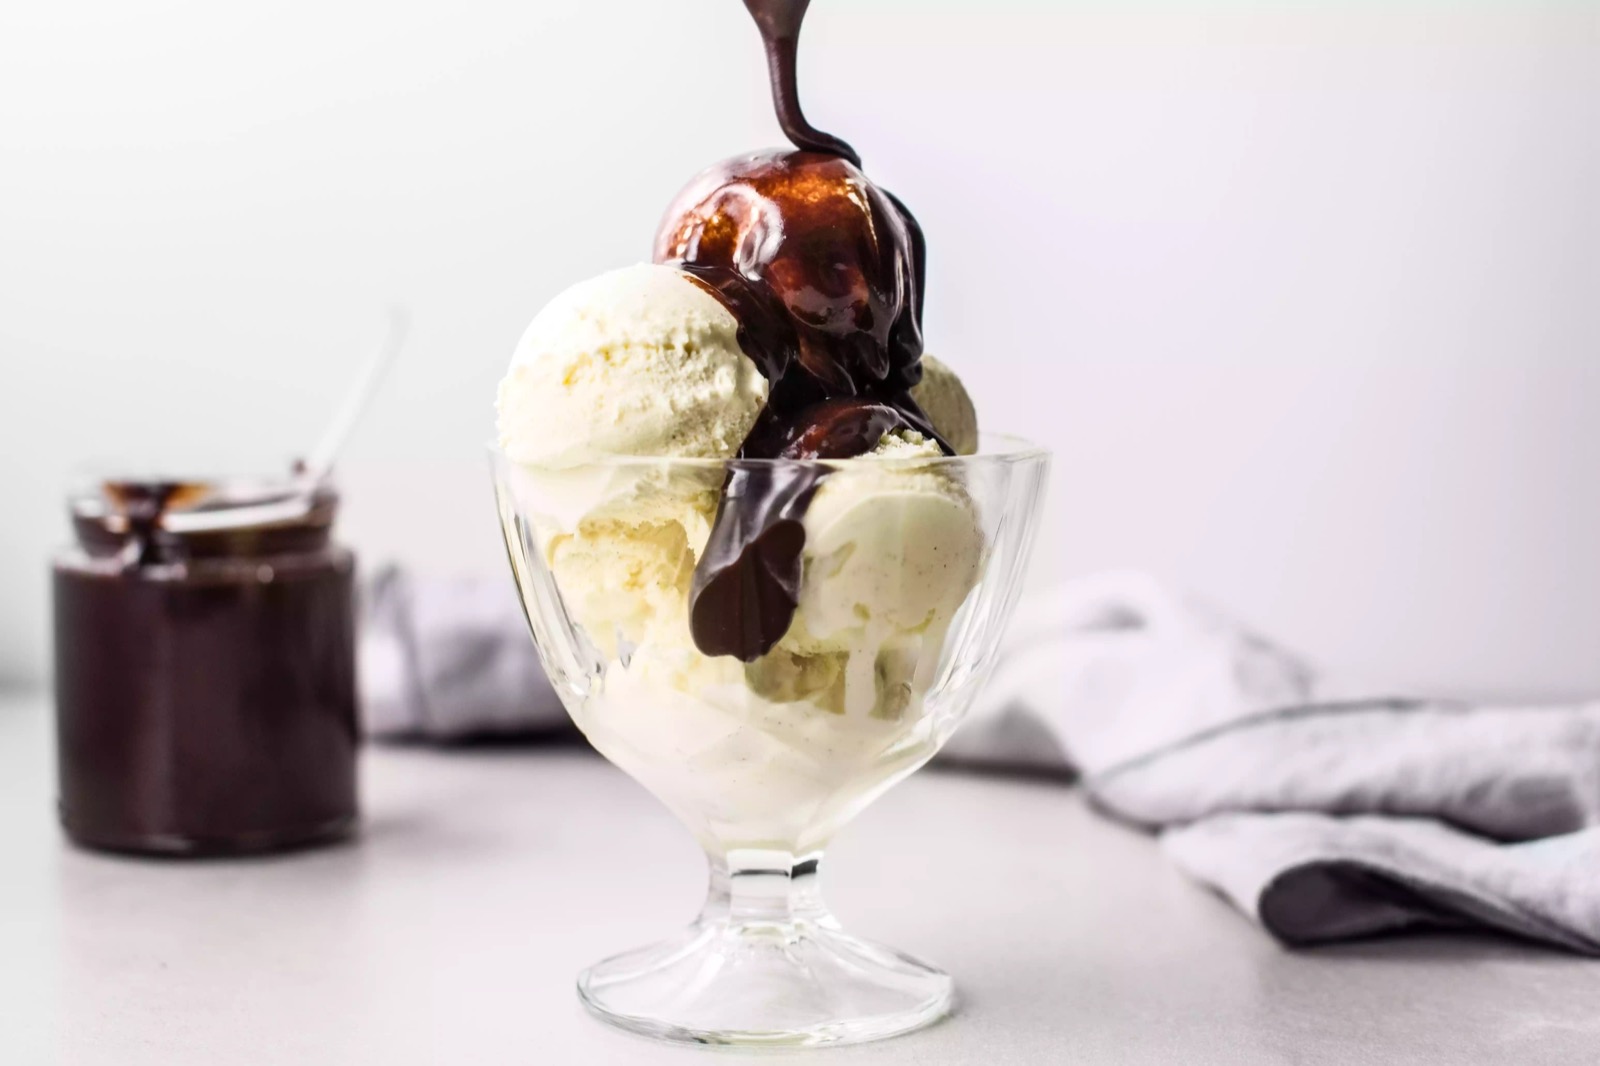 🍴 Design a Menu for Your New Restaurant to Find Out What You Should Have for Dinner Ice Cream With Hot Fudge Sauce